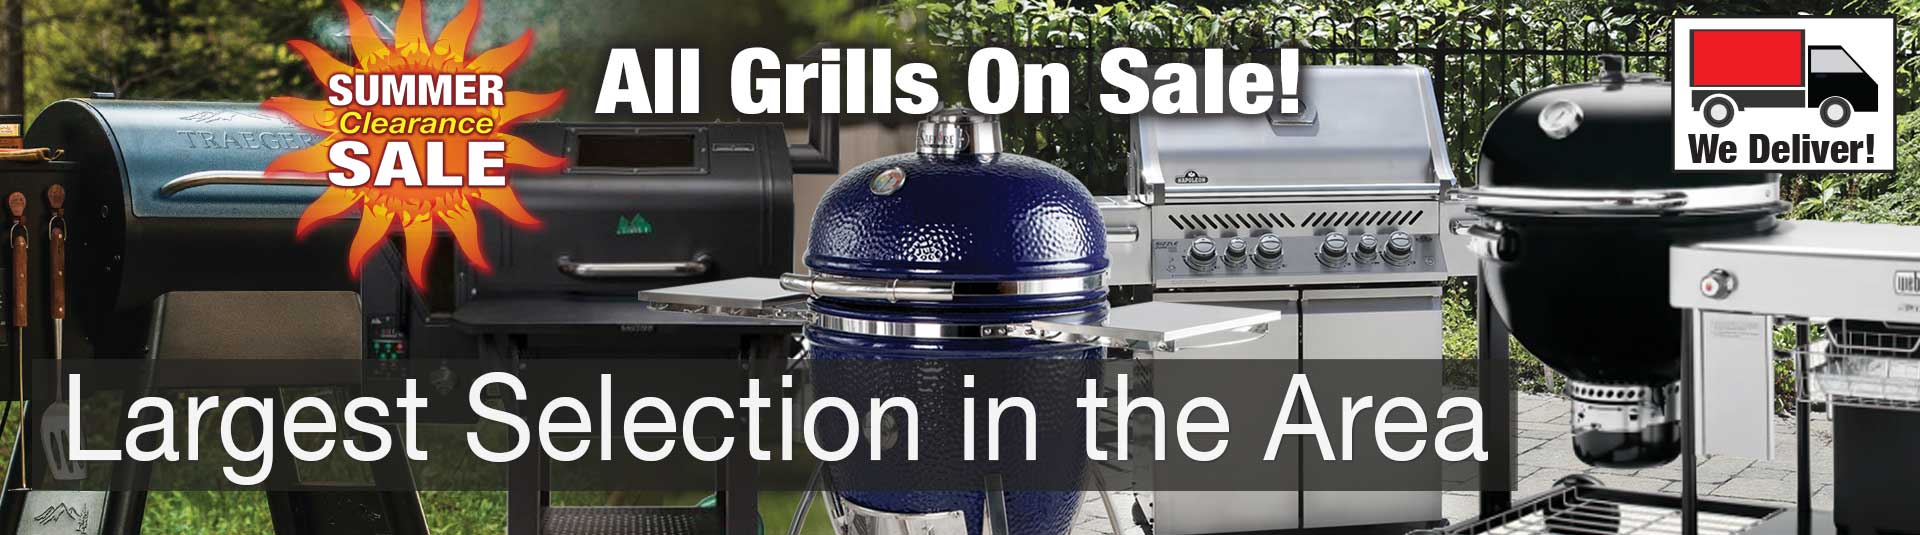 All BBQ Grills ON SALE during the Summer Clearance Sale at Benson Stone Company!